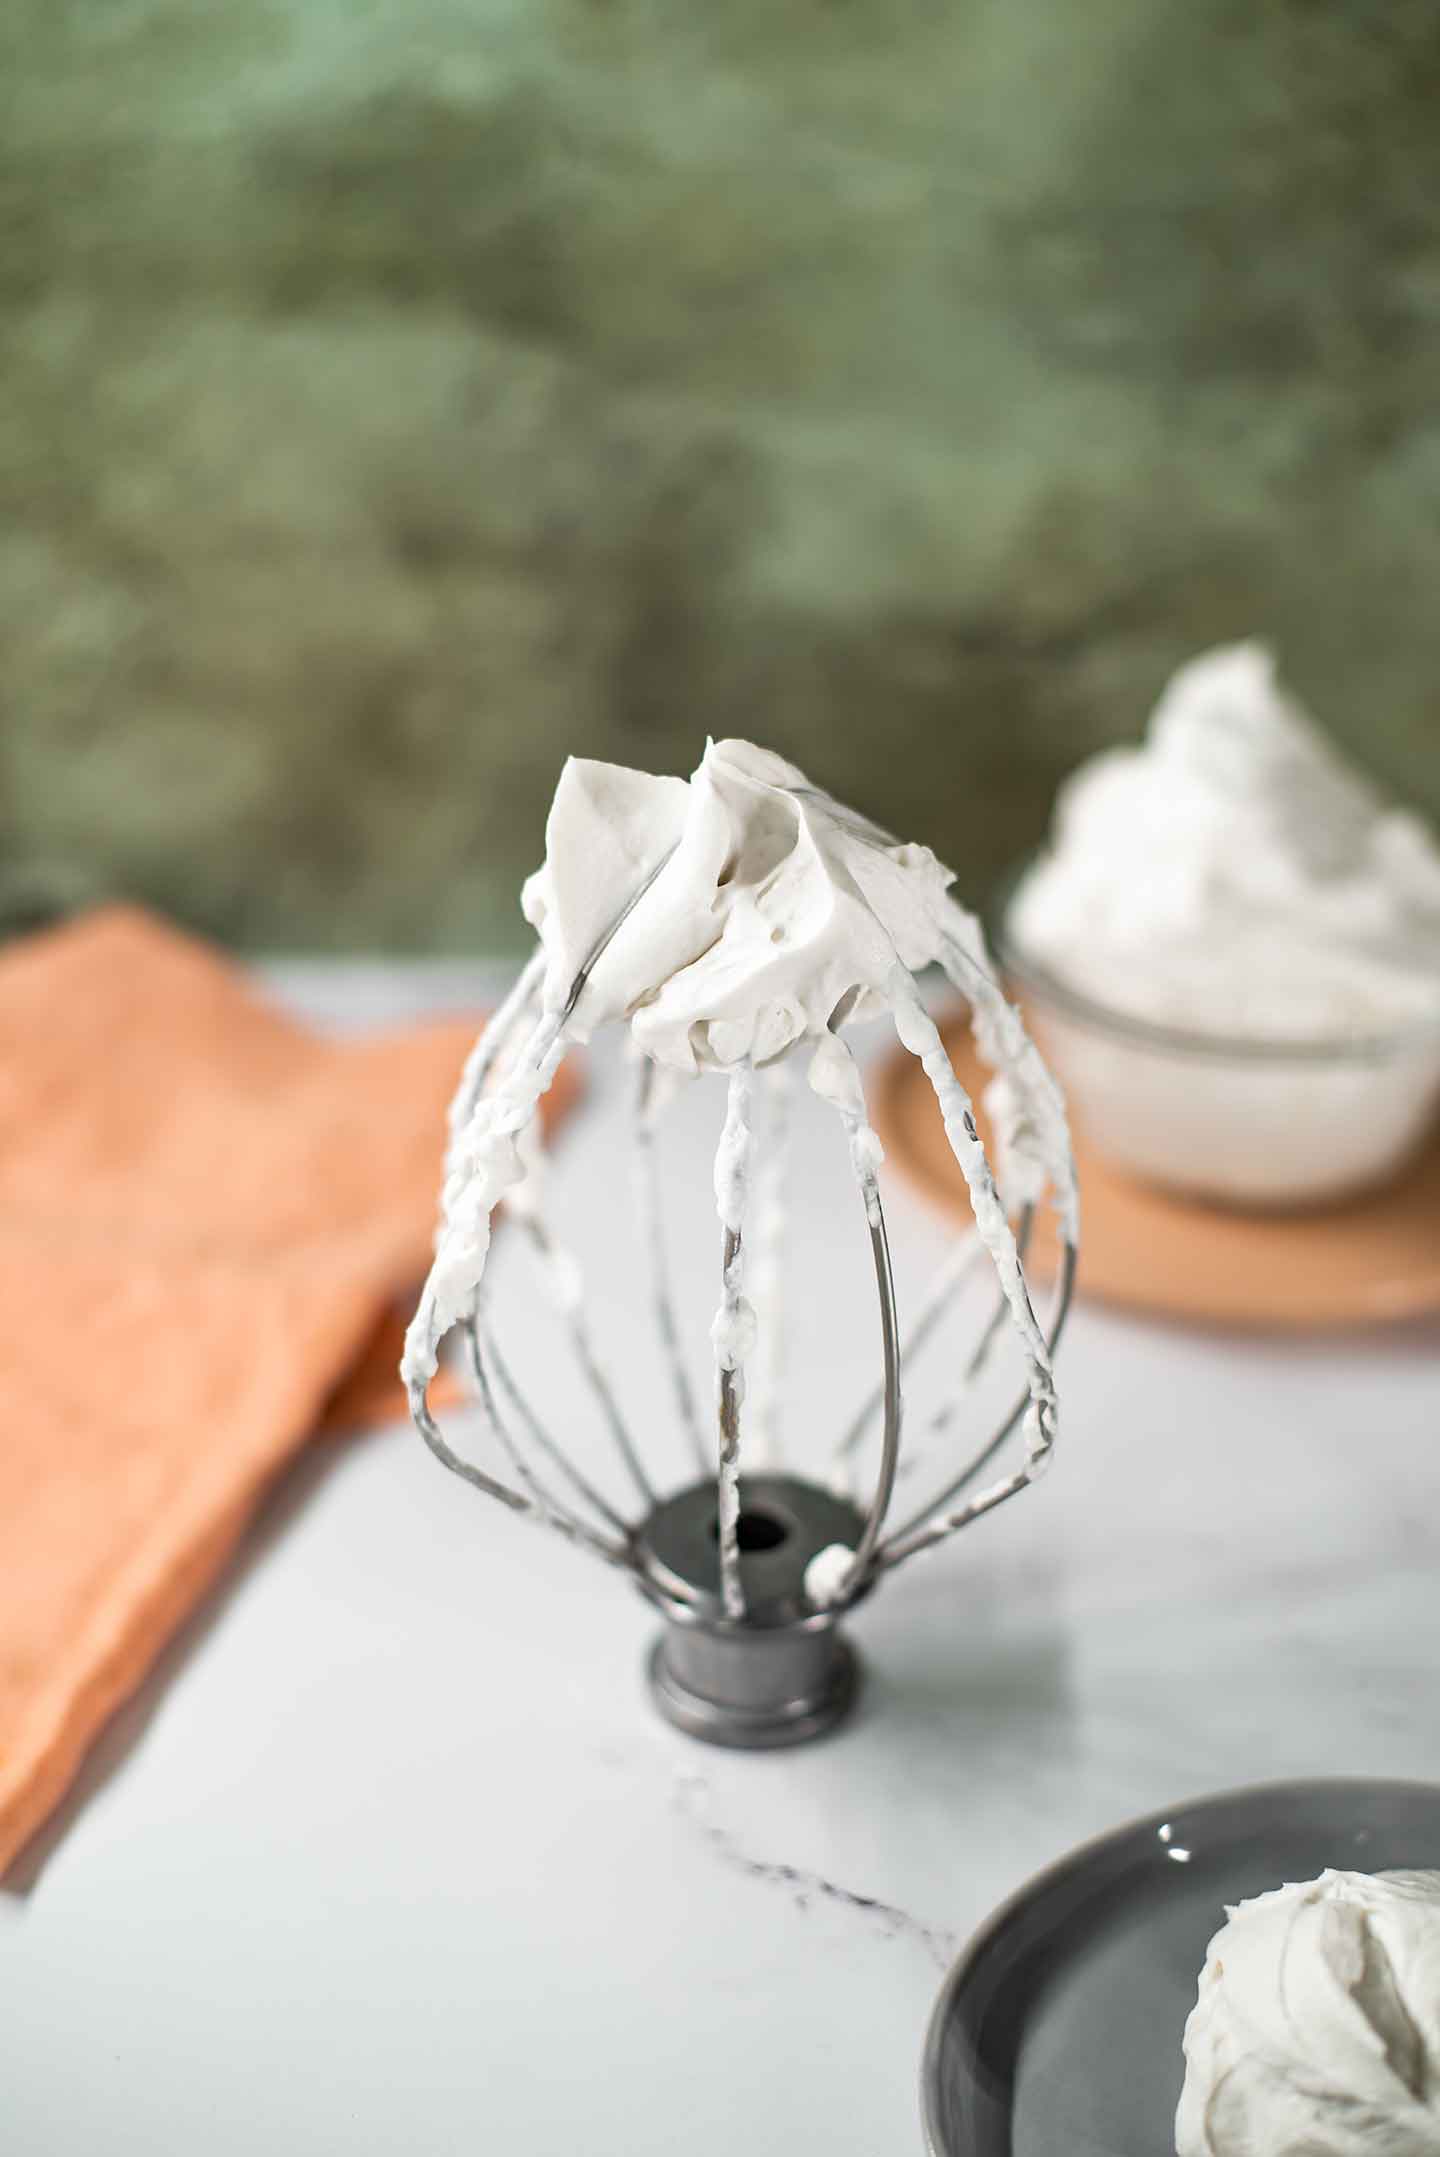 Close up of fluffy coconut whipped cream swirled on the whisk attachment of a stand mixer. The whip is firm enough that it holds its shape and stays firm on the upright whisk.